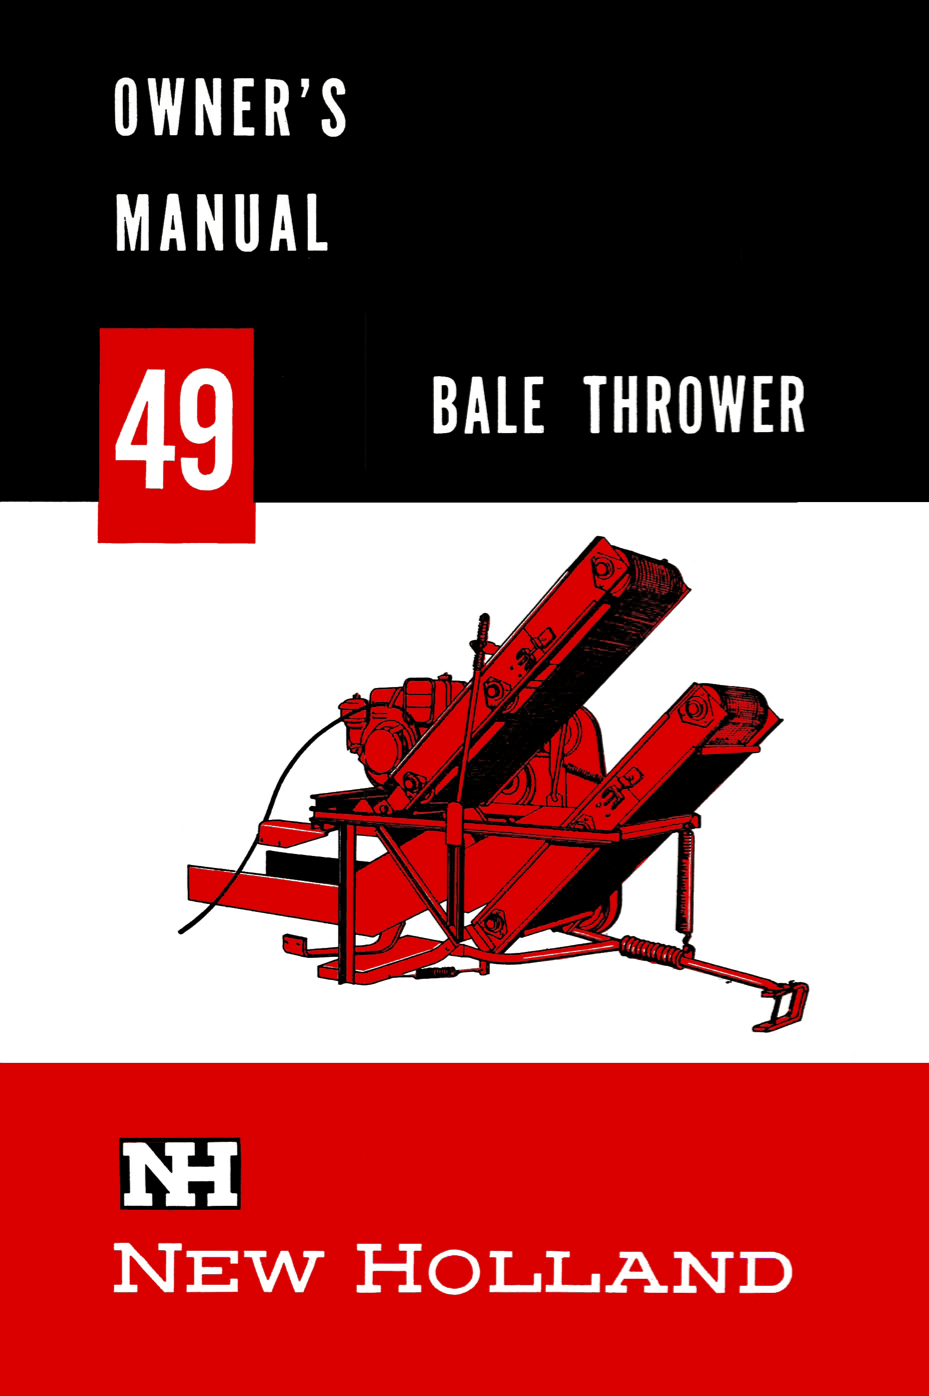 New Holland 49 Bale Thrower - Owner's Manual - Ag Manuals - A Provider of Digital Farm Manuals - 1